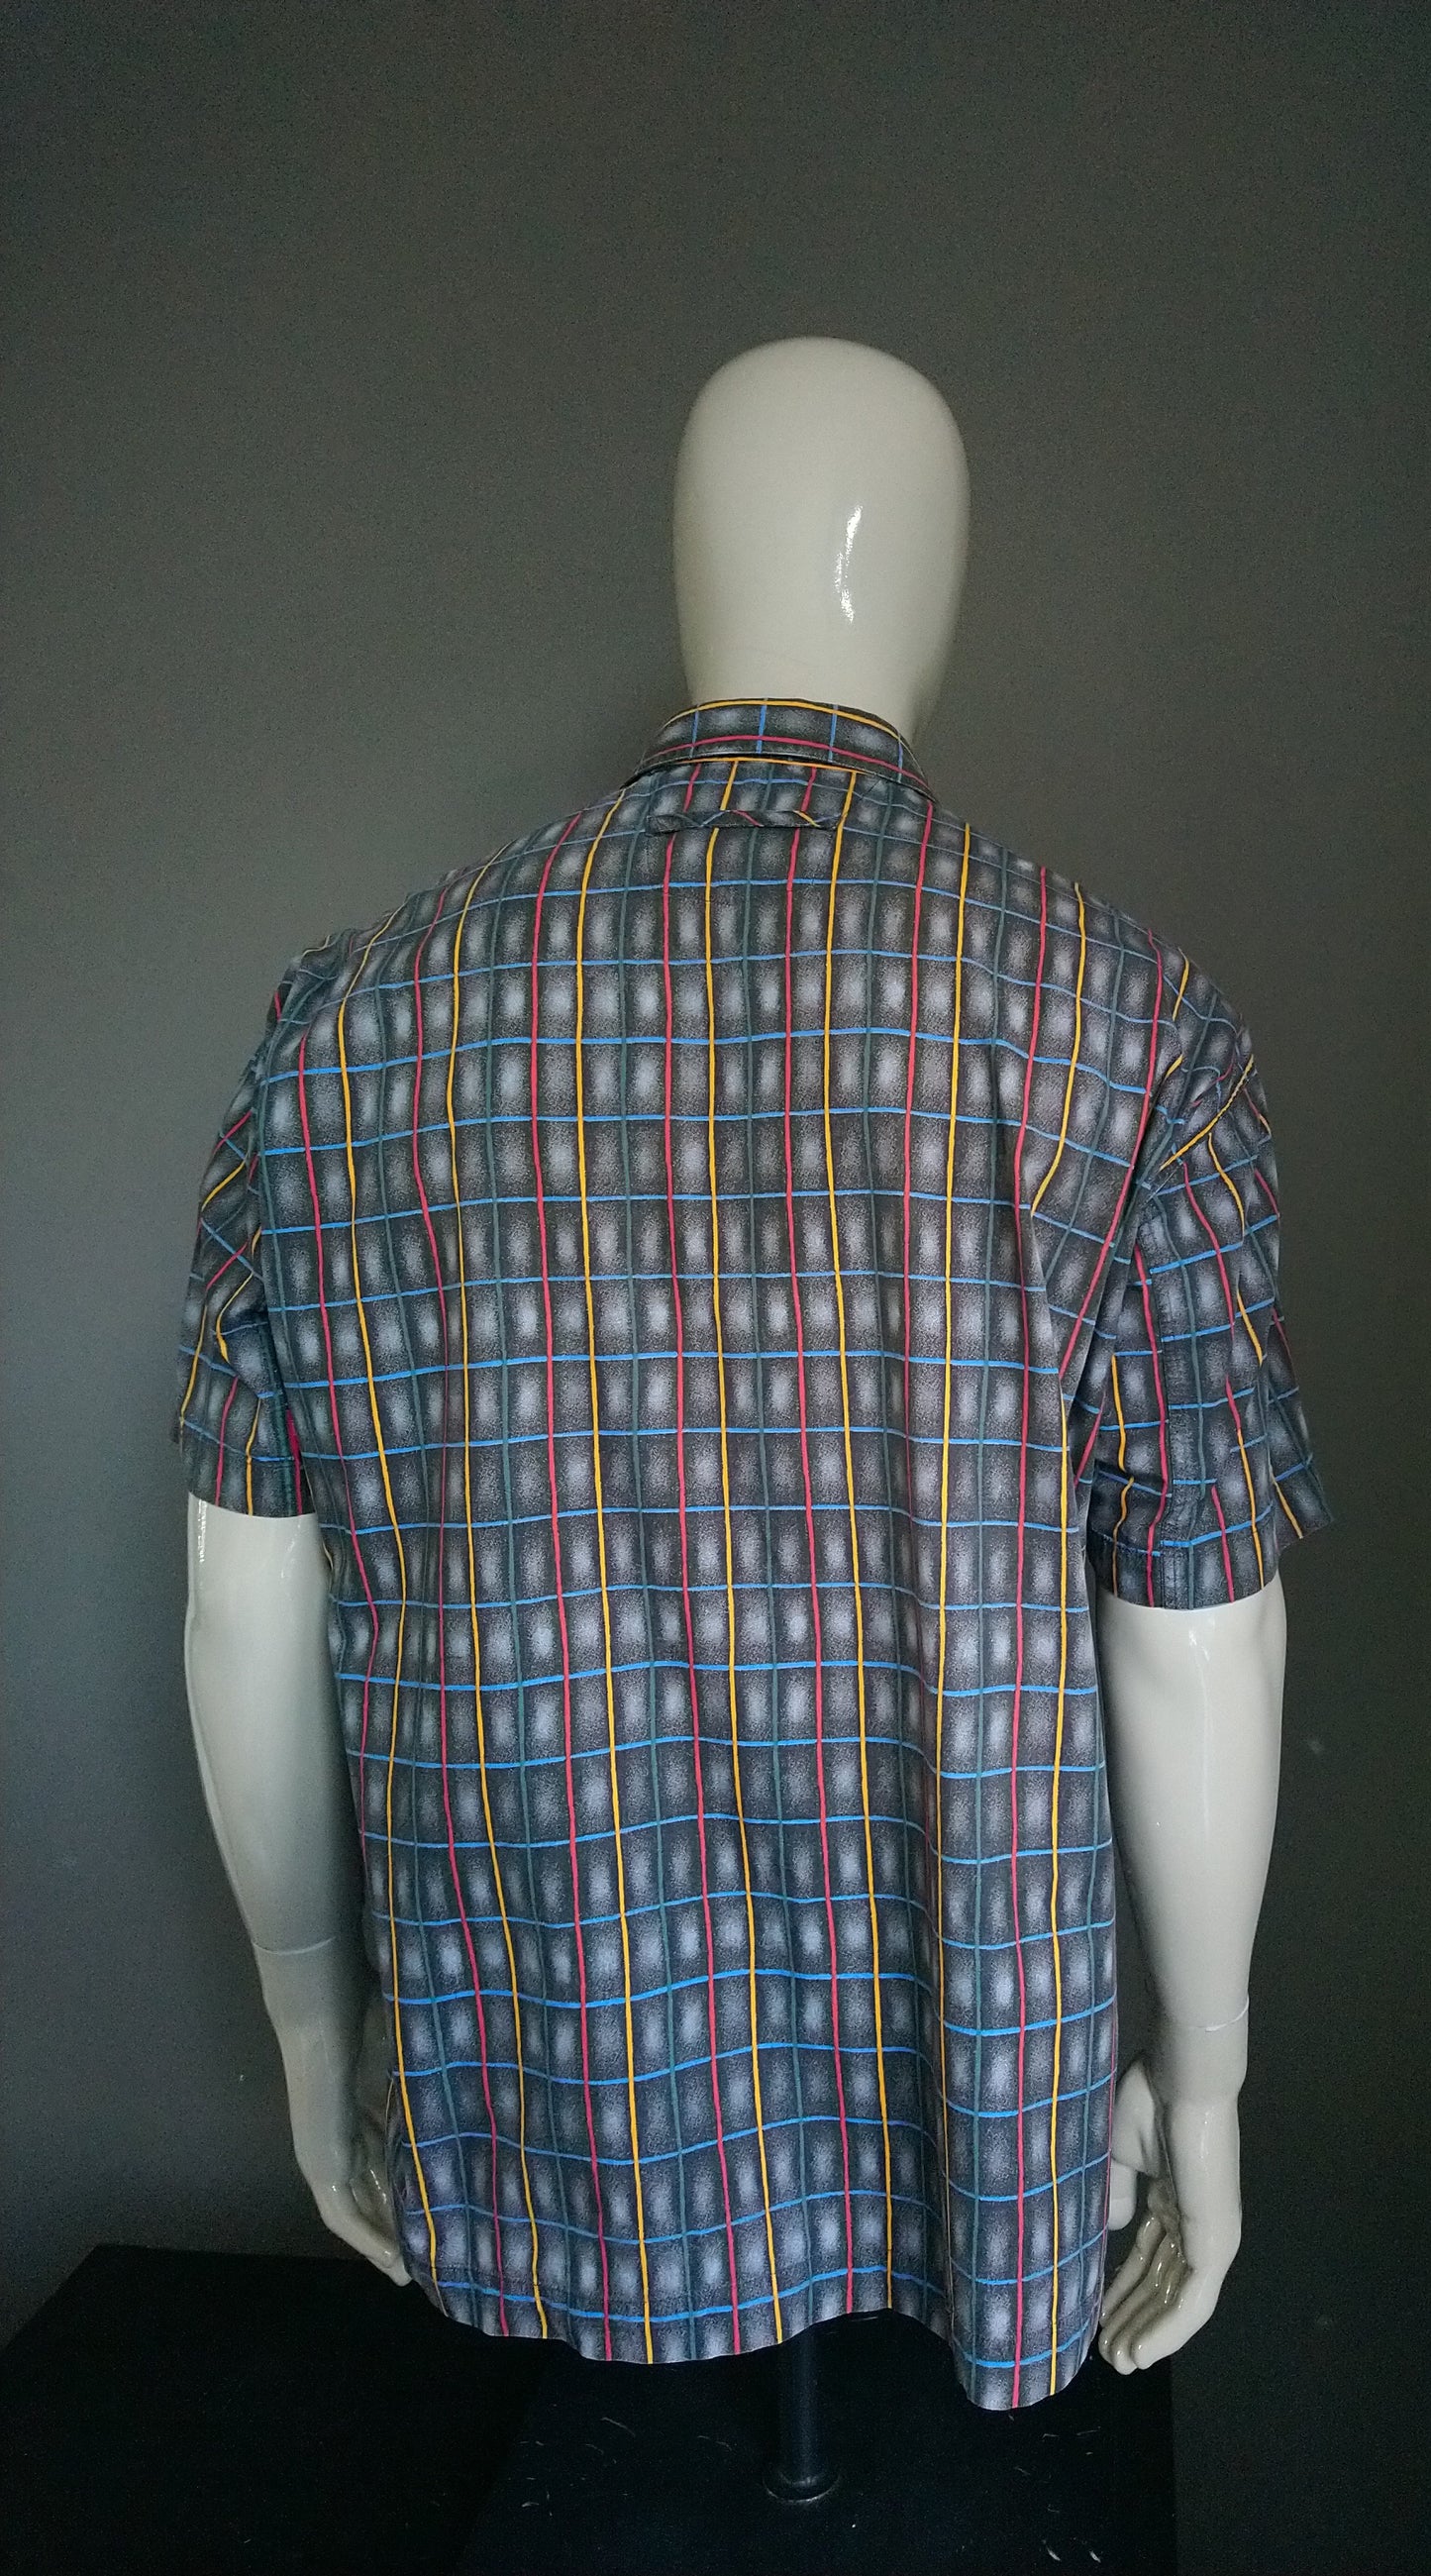 Vintage signum shirt short sleeve. Larger buttons. Gray red green yellow checkered. Size XXL / 2XL.